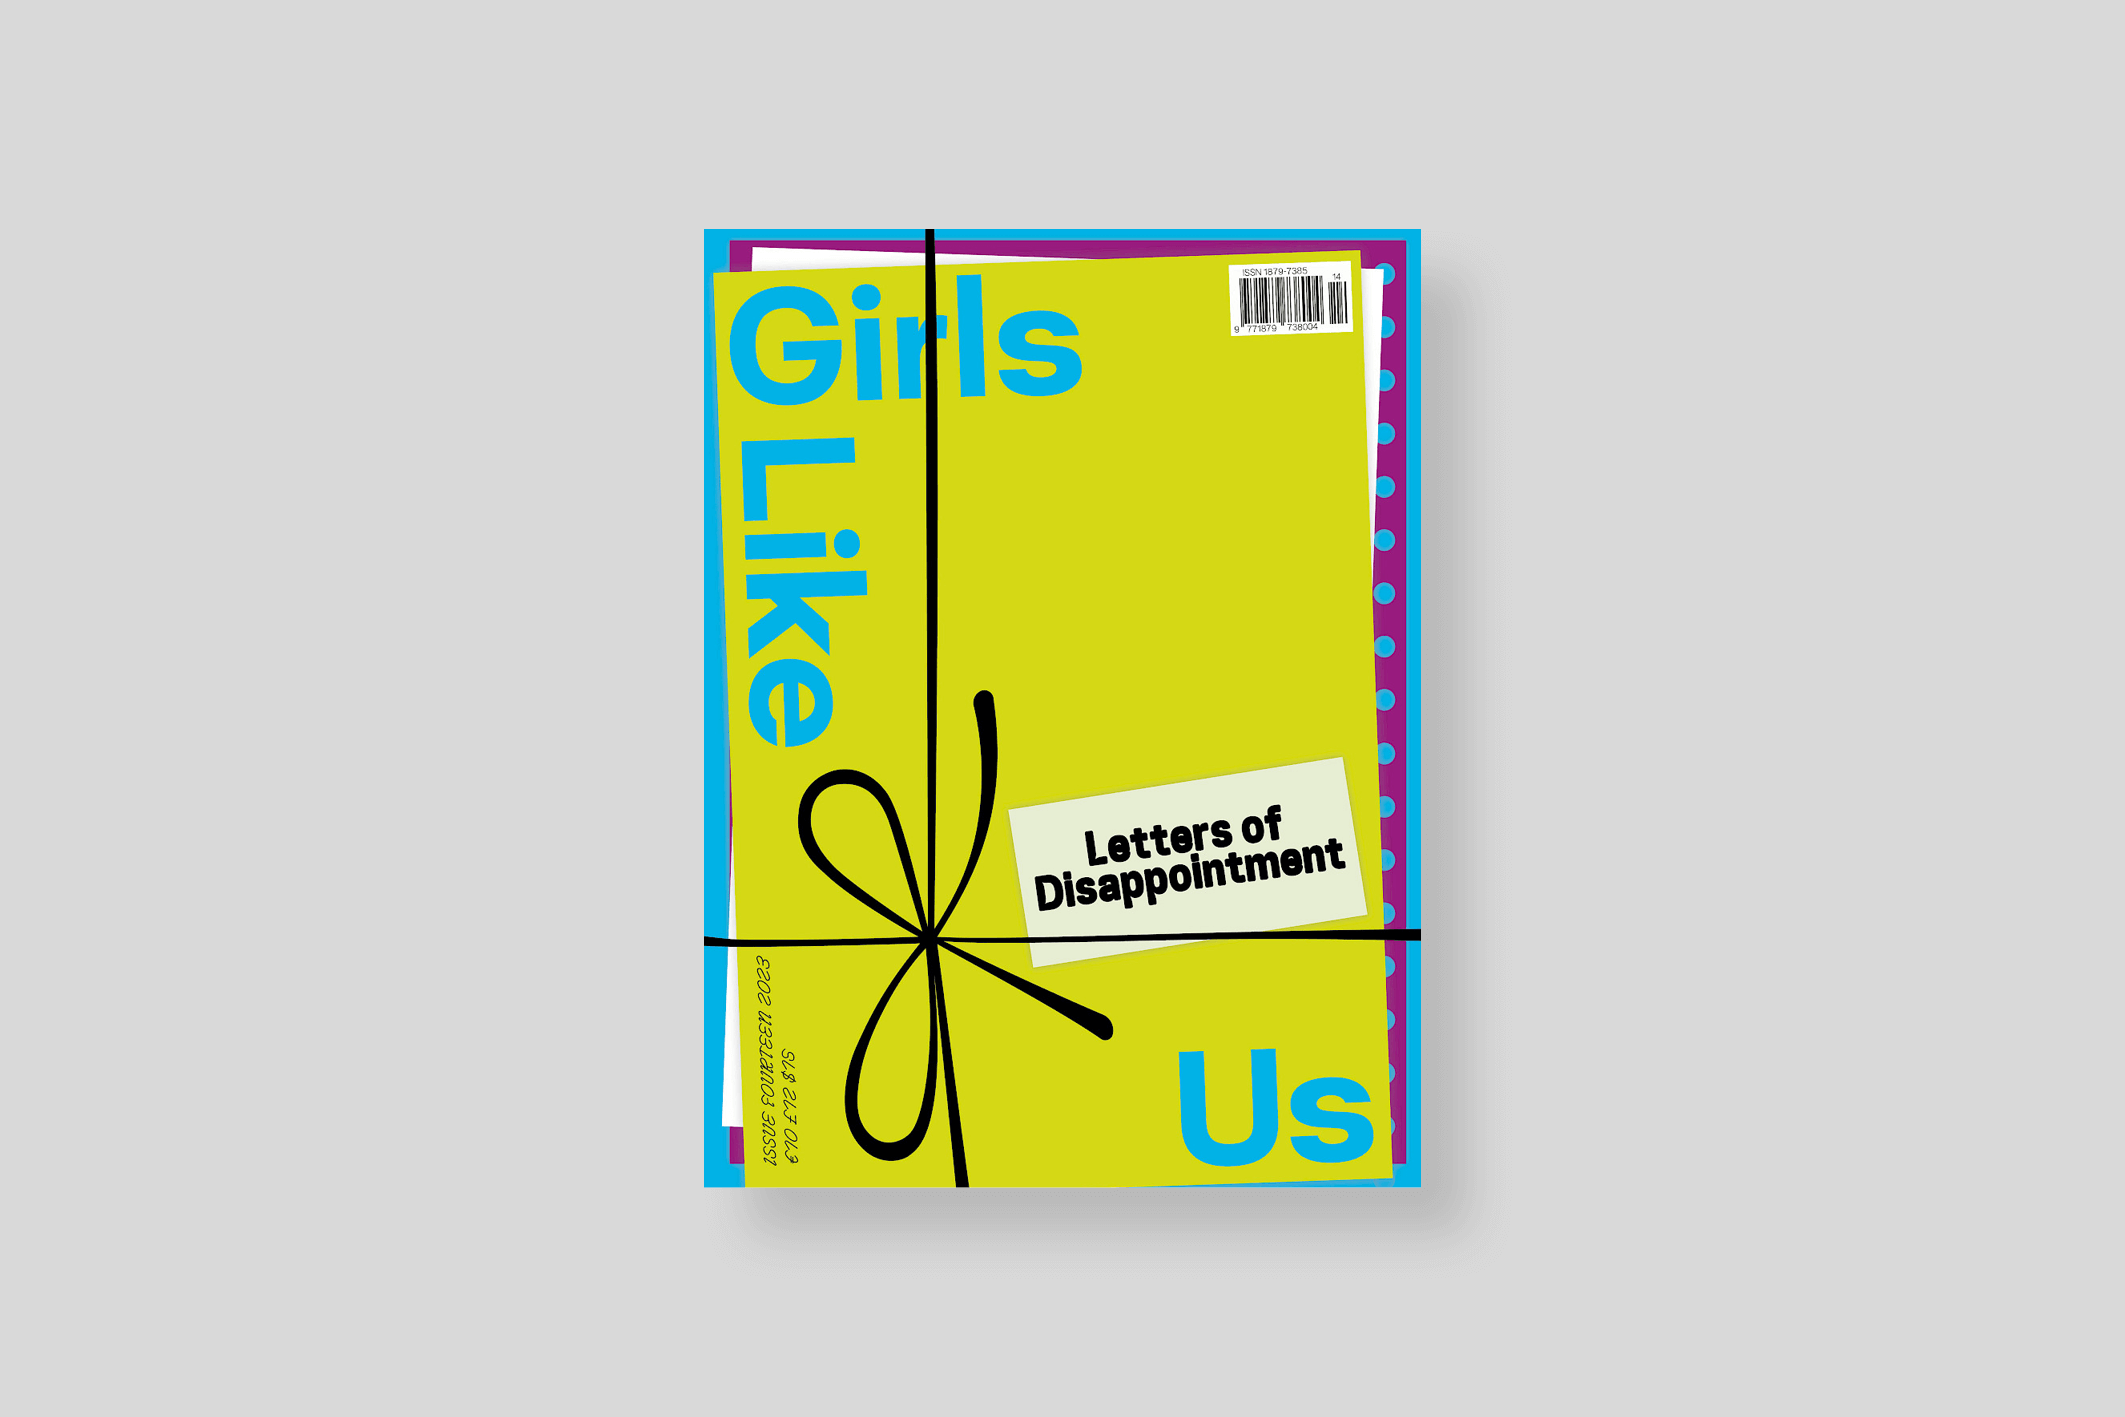 girls-like-us-14-disappointment-cover